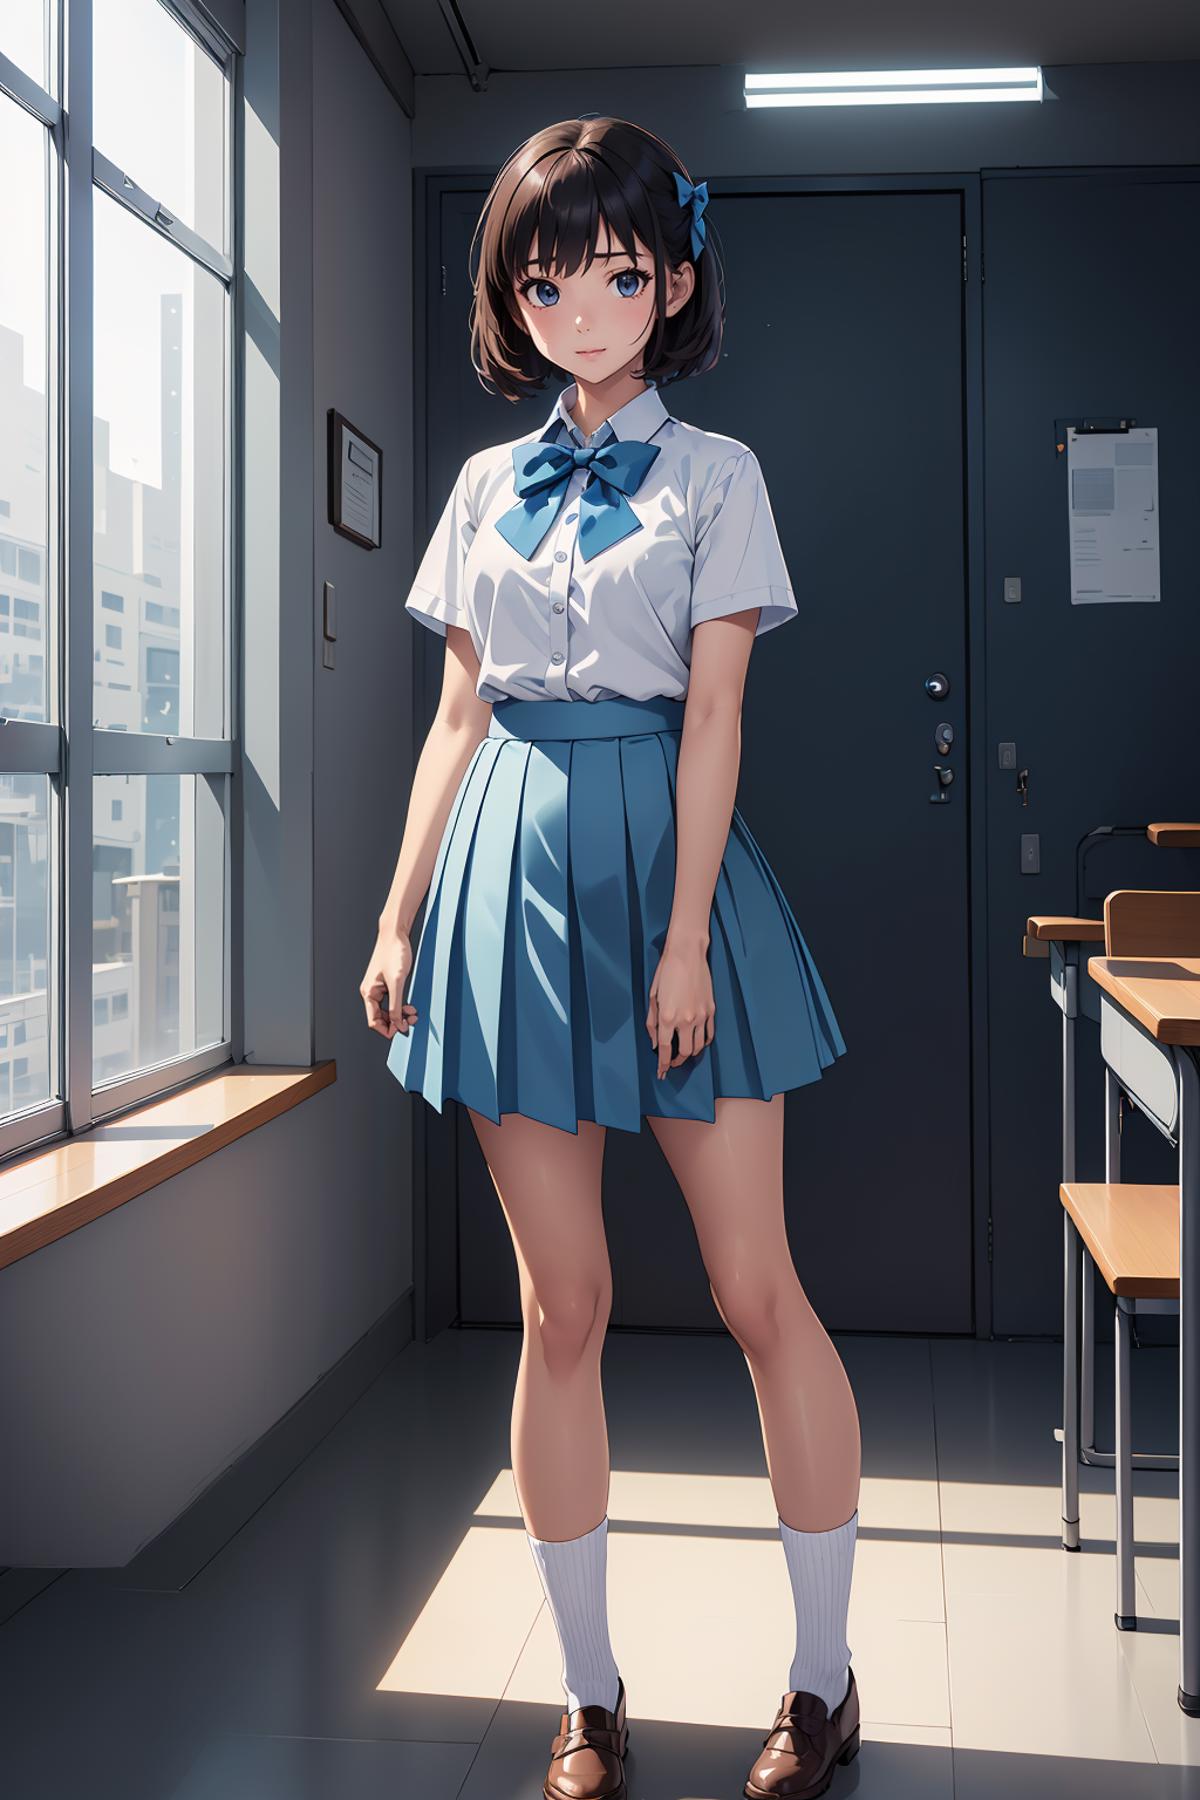 CNHS JHS Student | Female image by Tokugawa